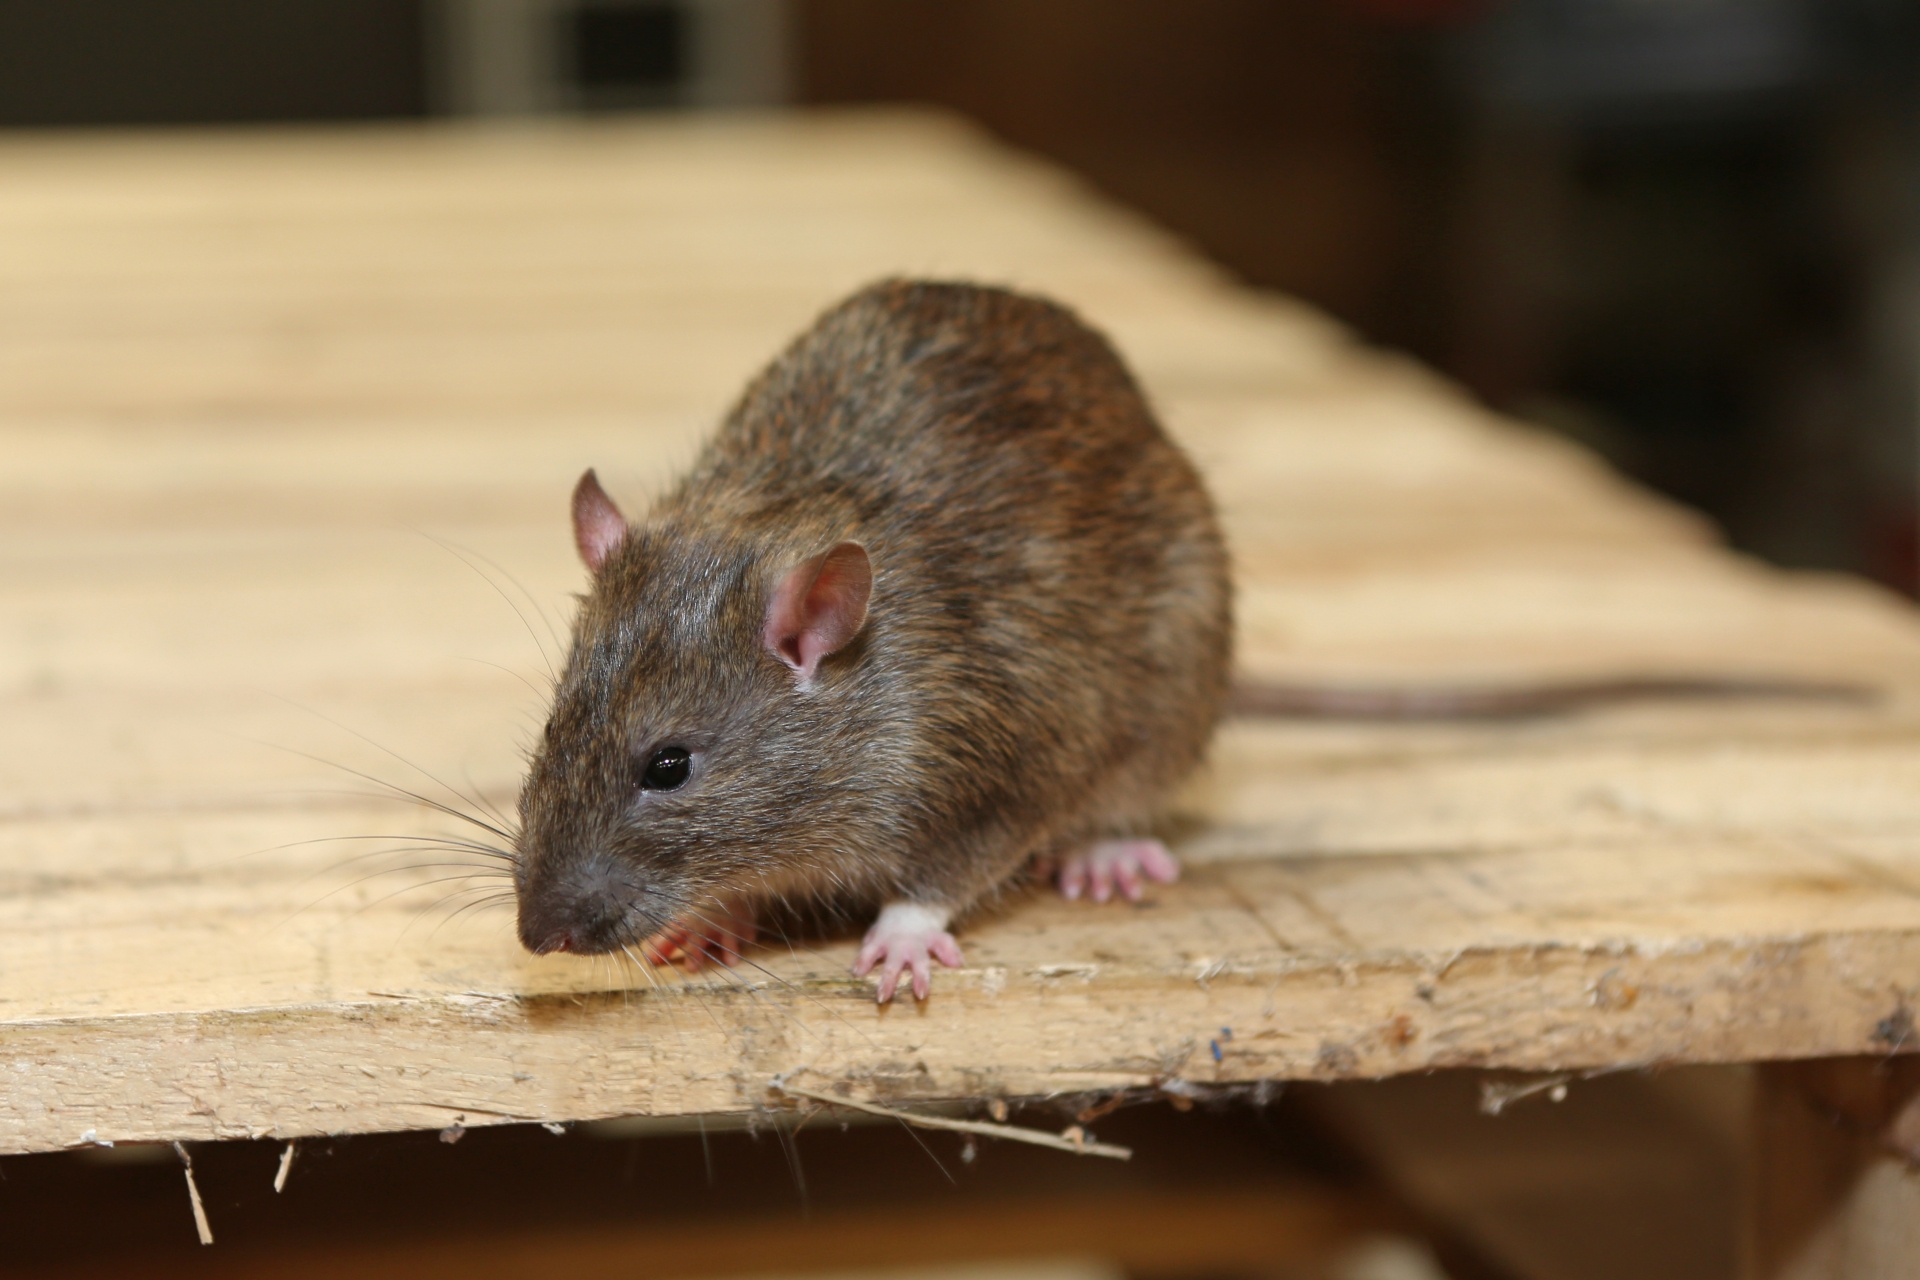 Rat Infestation, Pest Control in Brent Cross, Hendon, NW4. Call Now 020 8166 9746